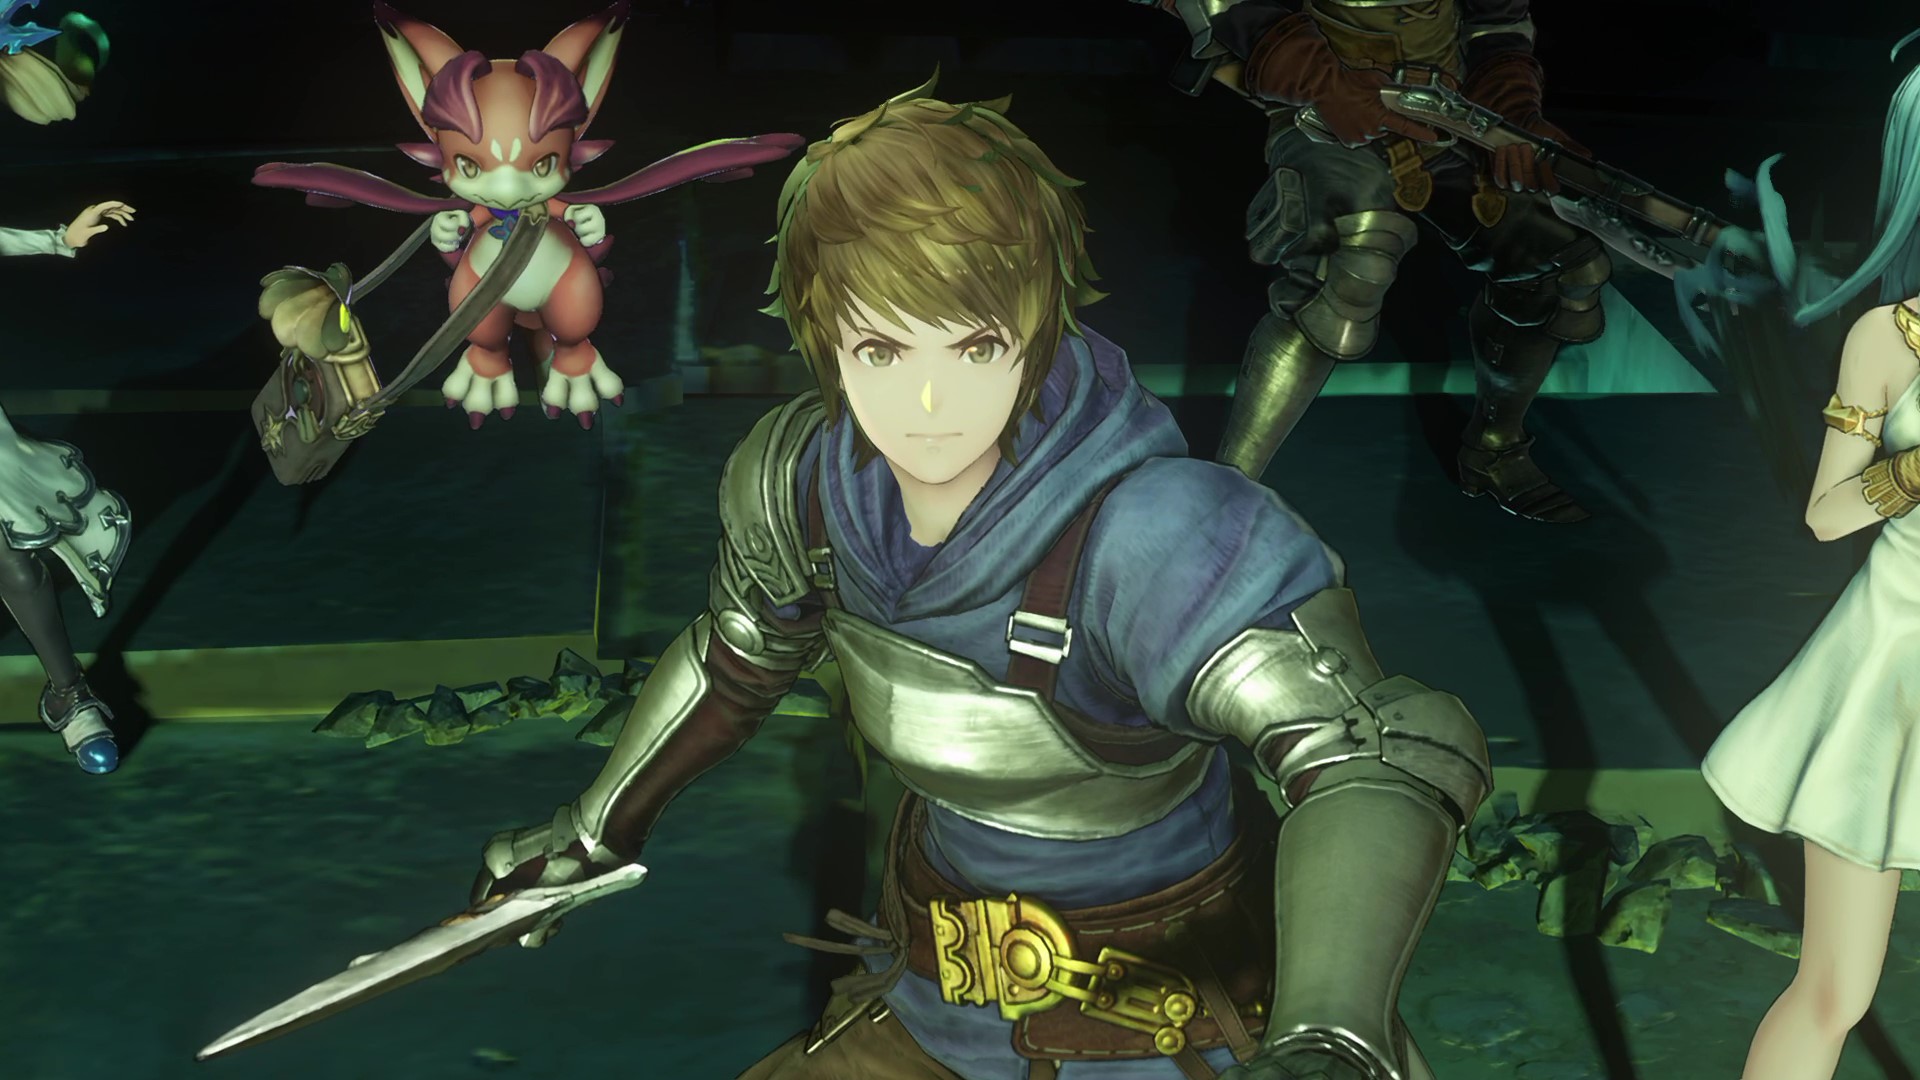 Action RPG Granblue Fantasy: Relink Looks Fantastic in Hours of